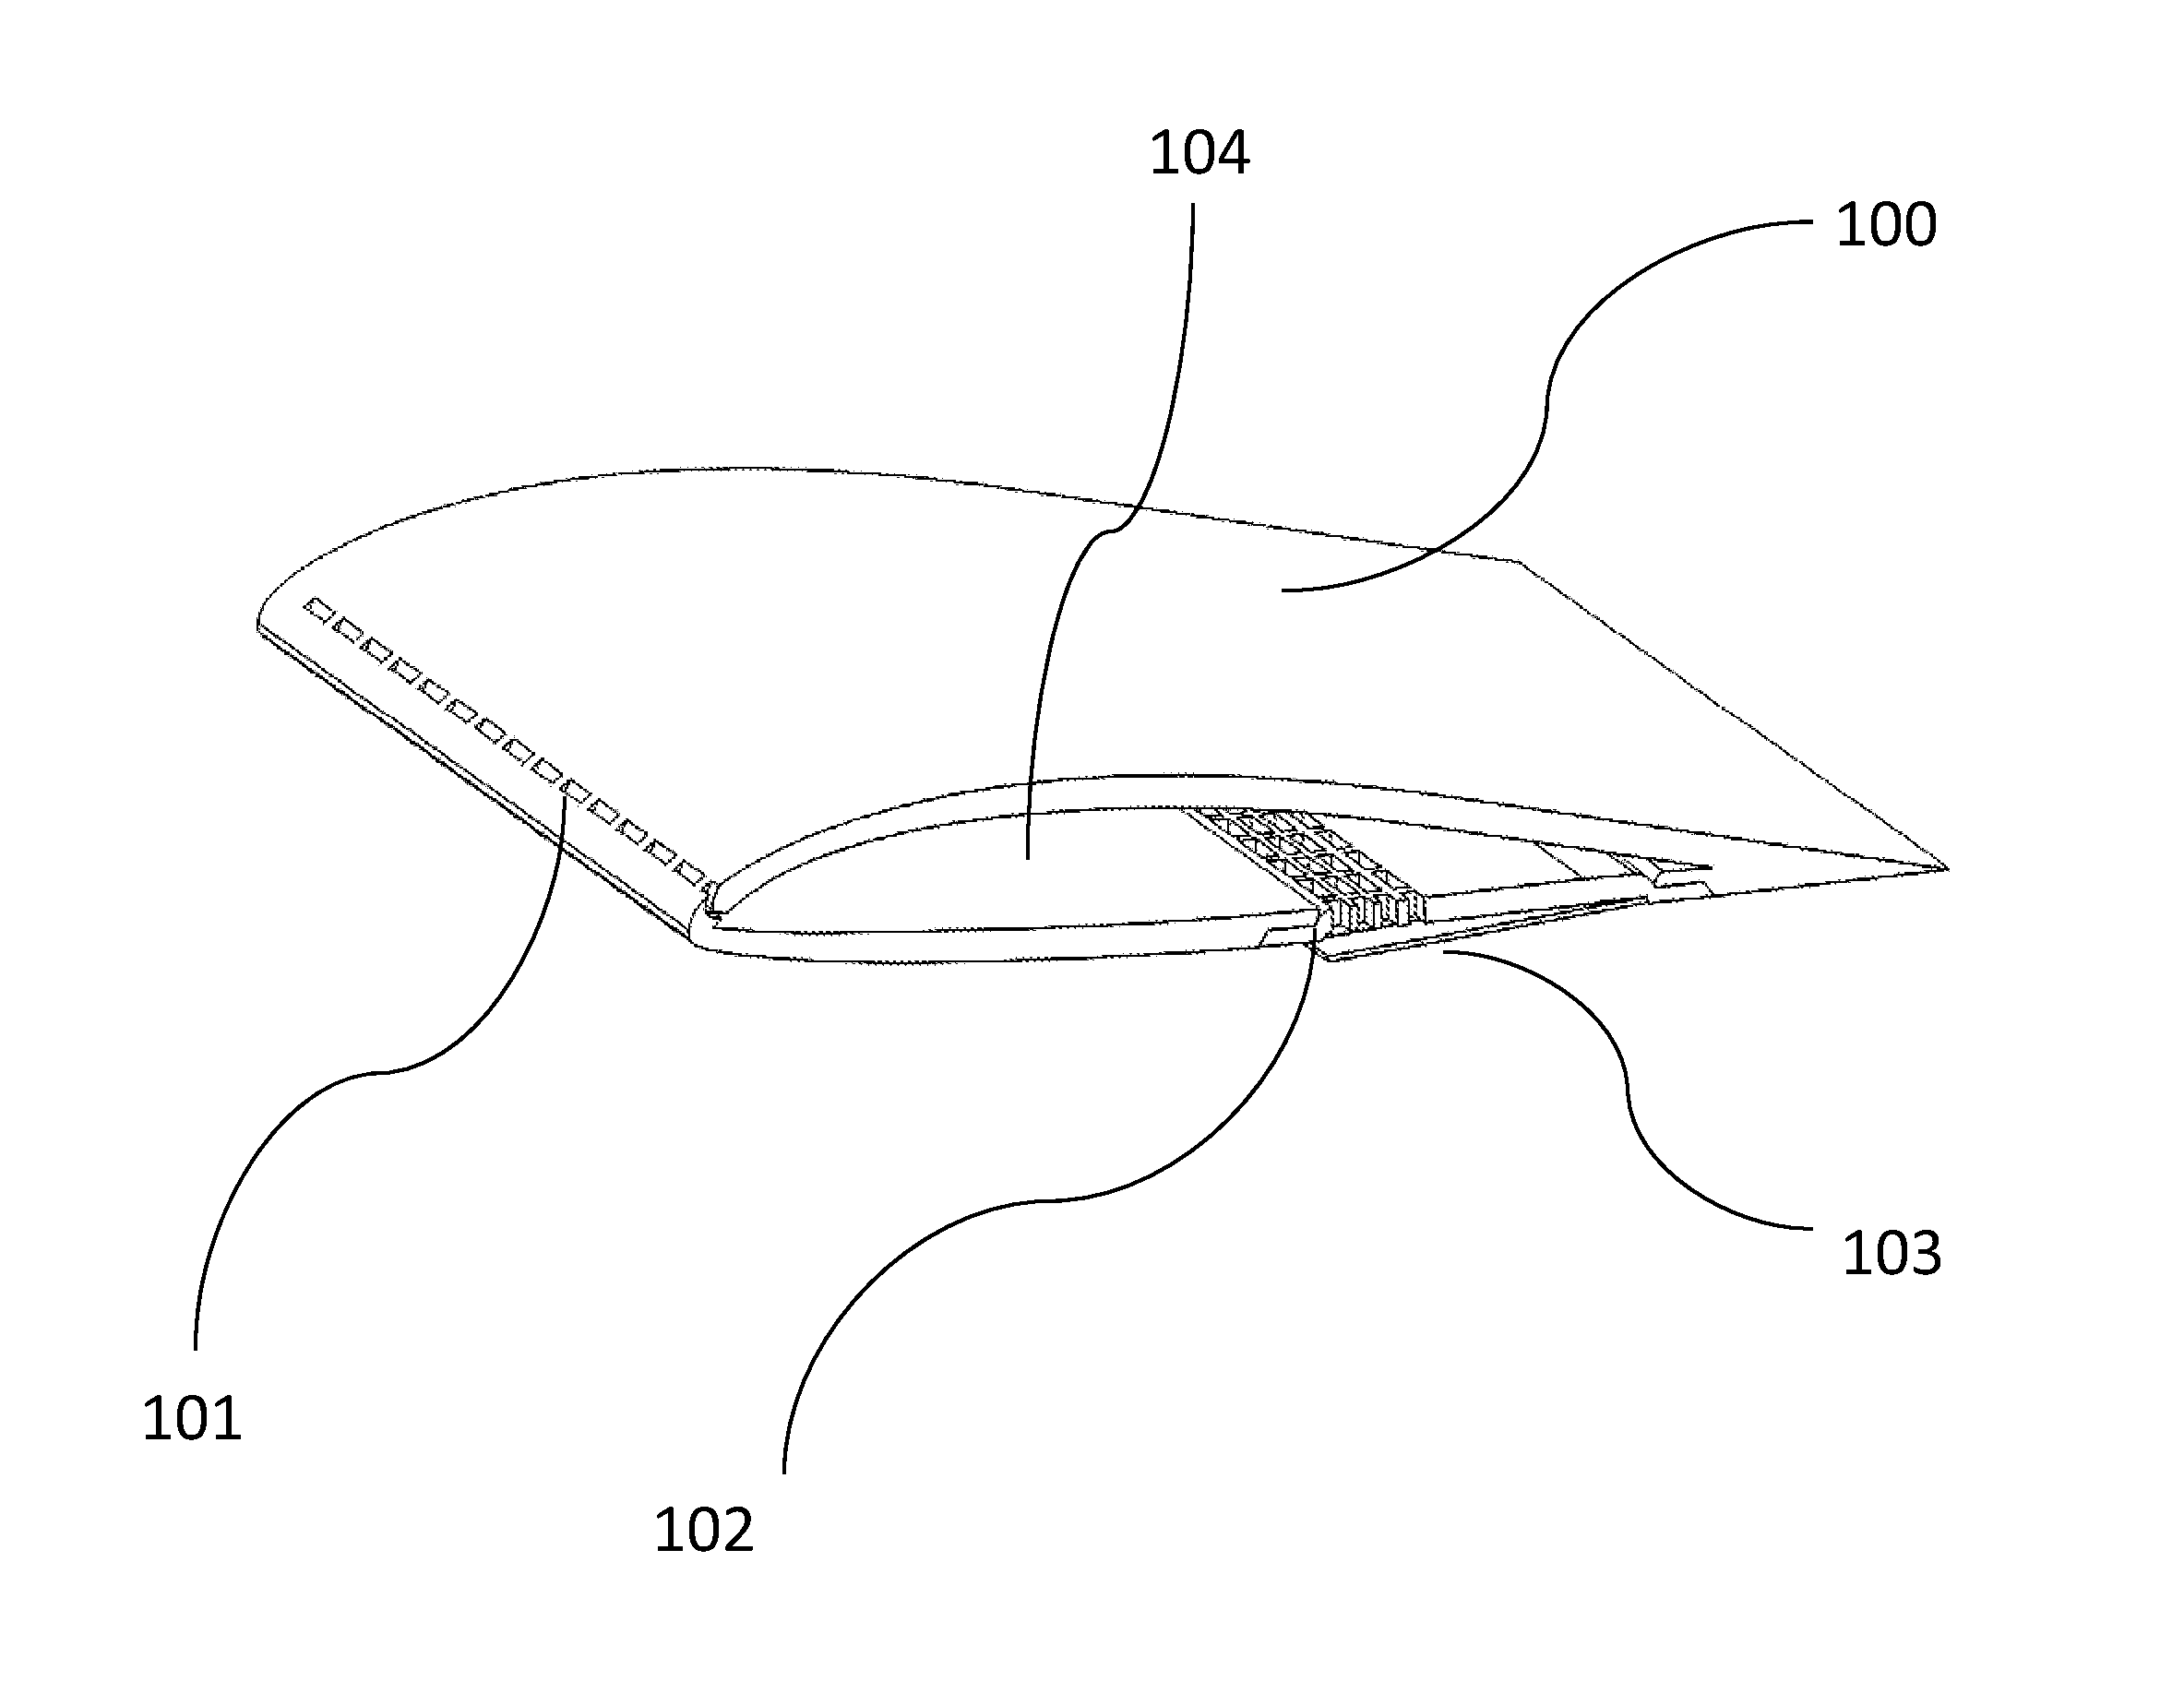 System and Method for Distributed Active Fluidic Bleed Control